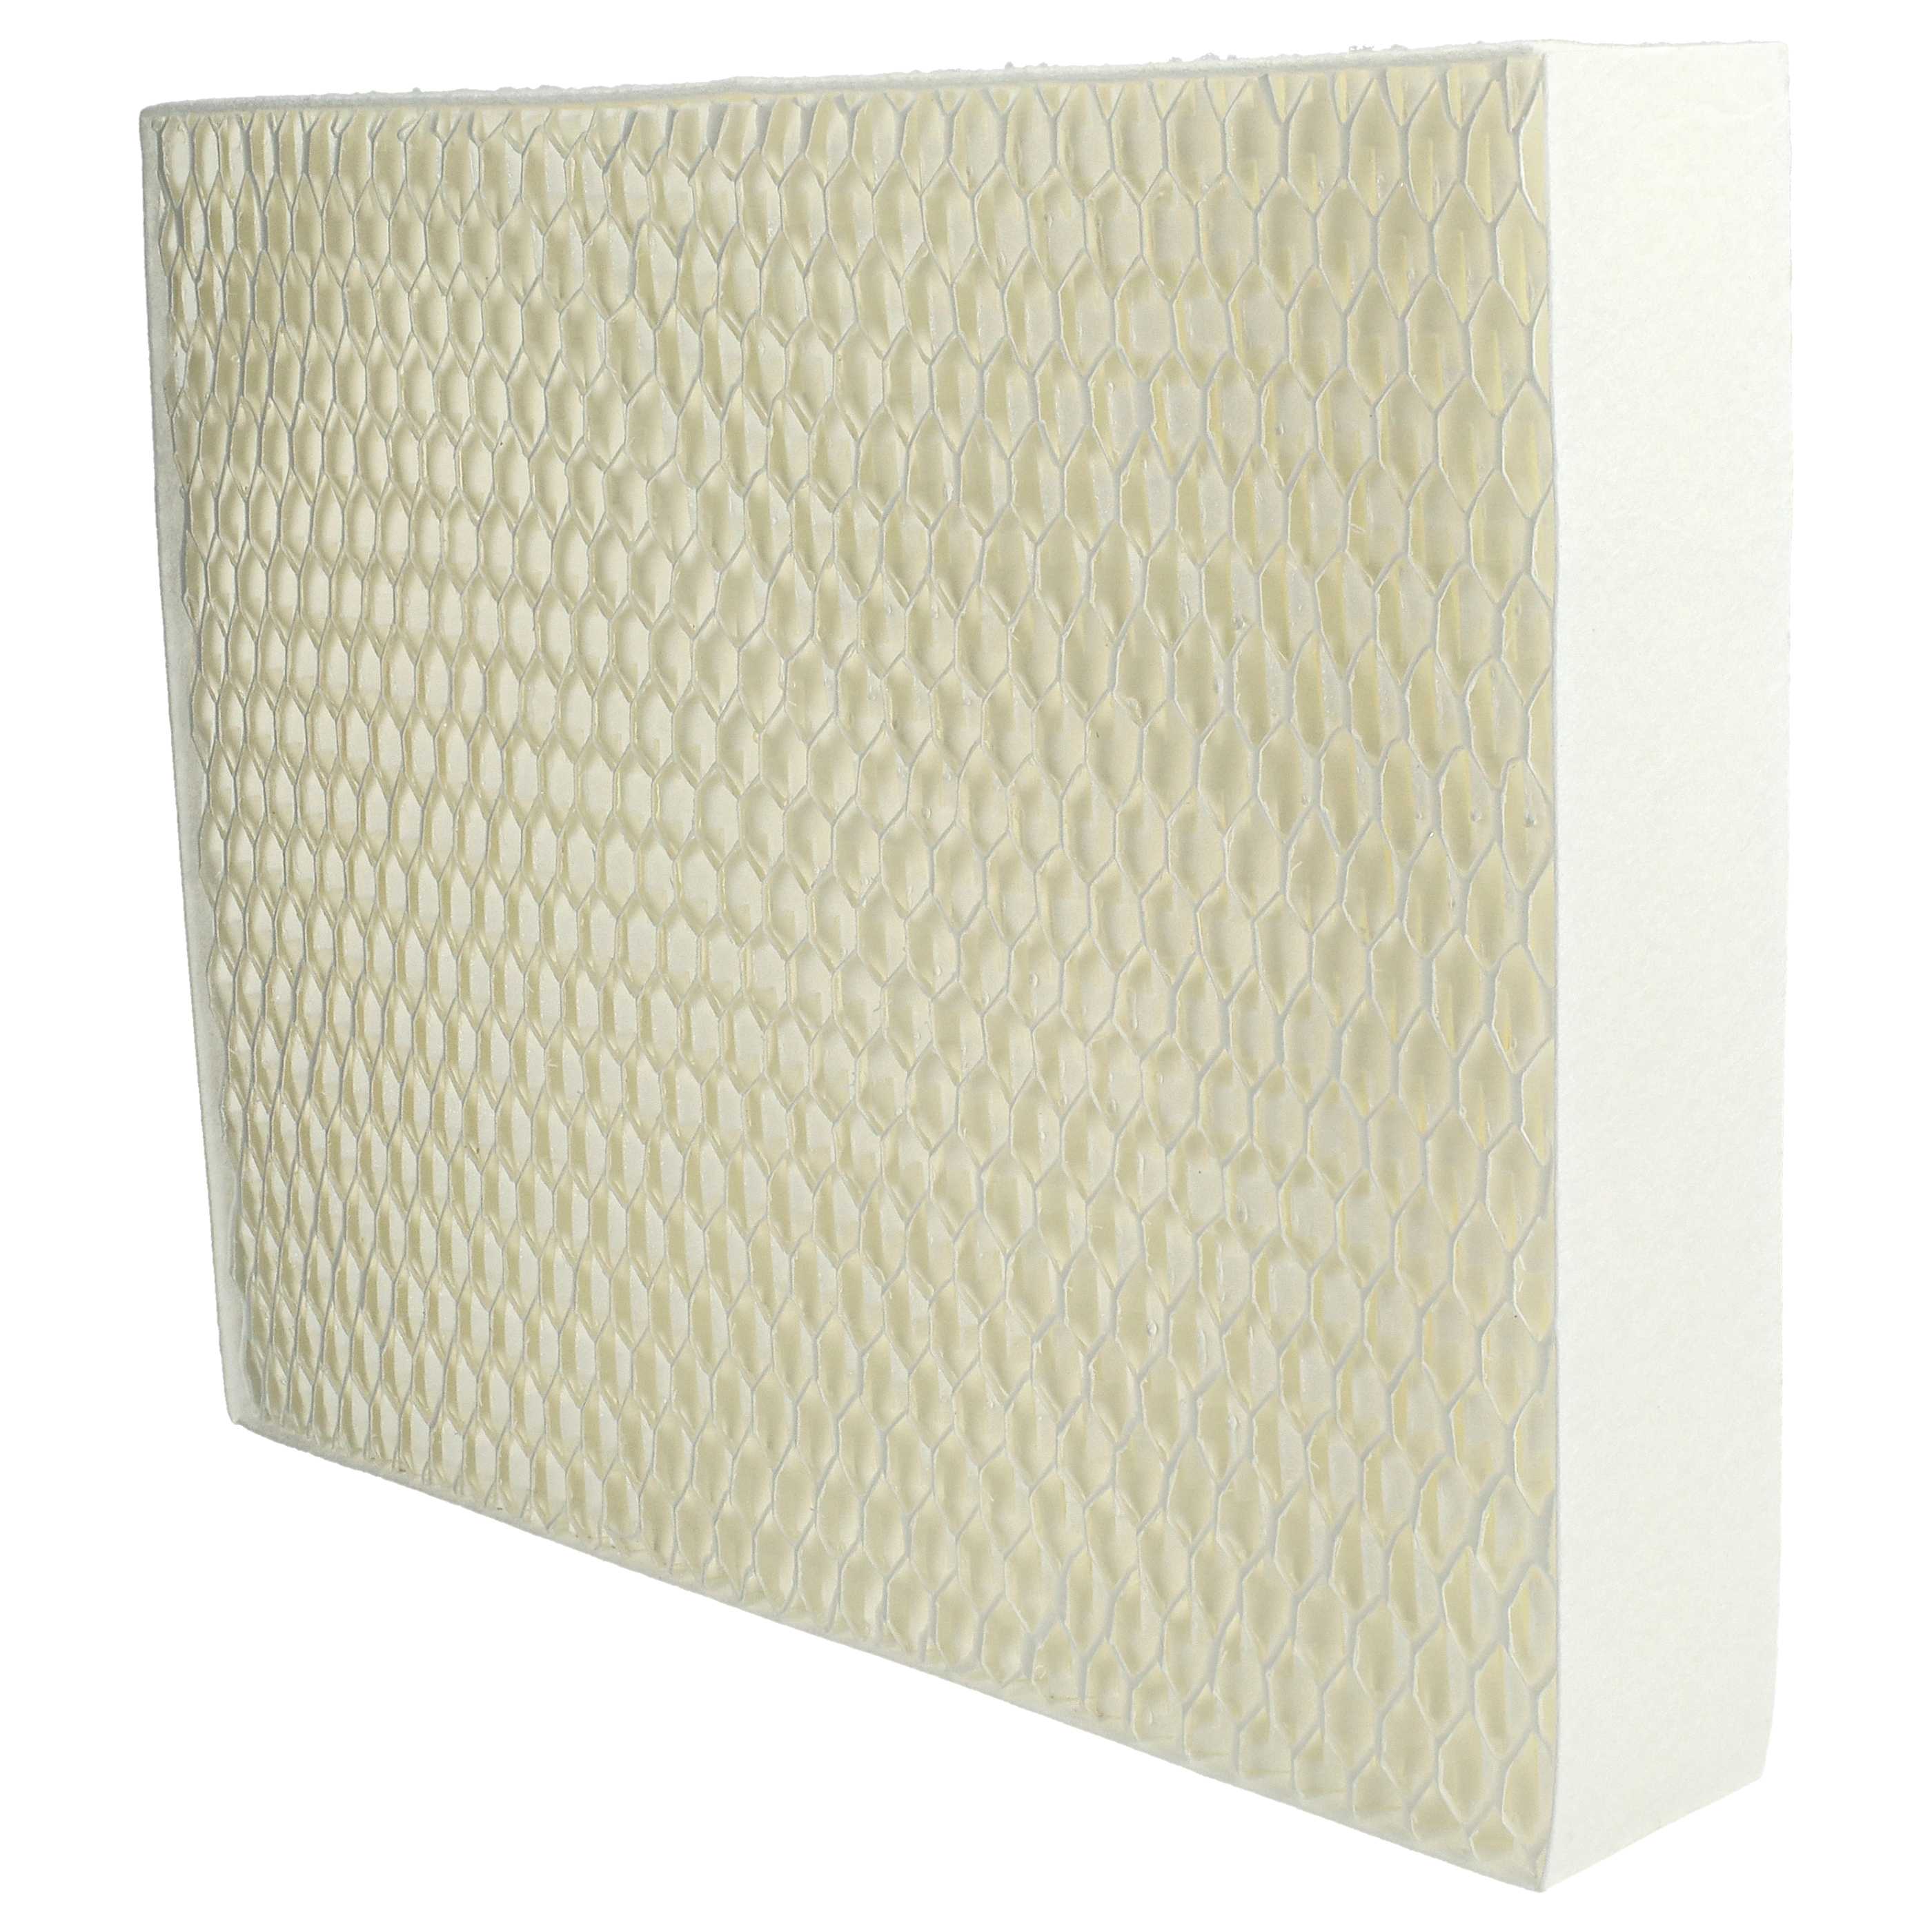 4x Filter replaces Stadler Form 10004, 14643/10 for Humidifier - paper